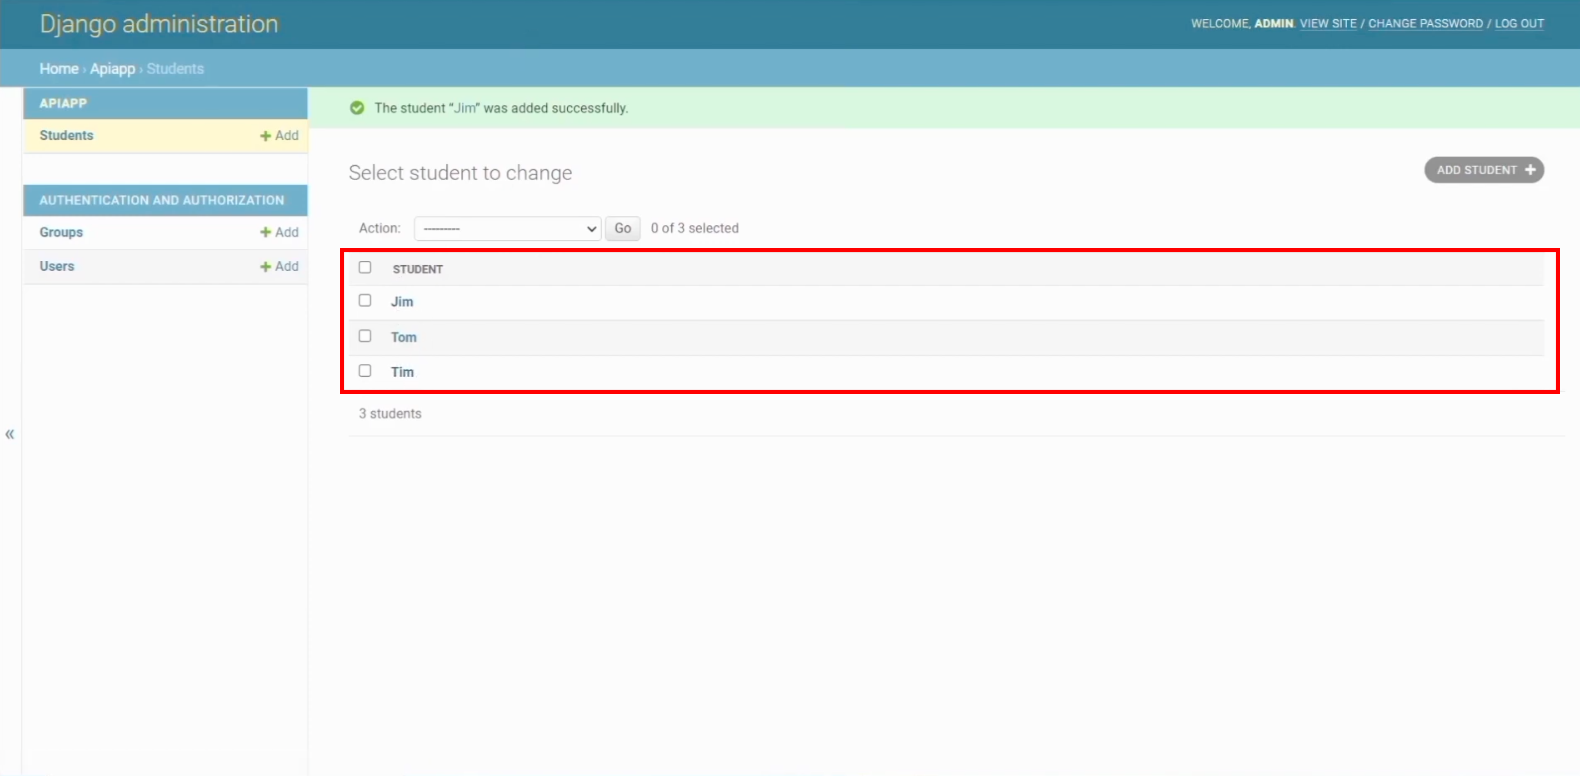 Creating objects in Django admin pannel